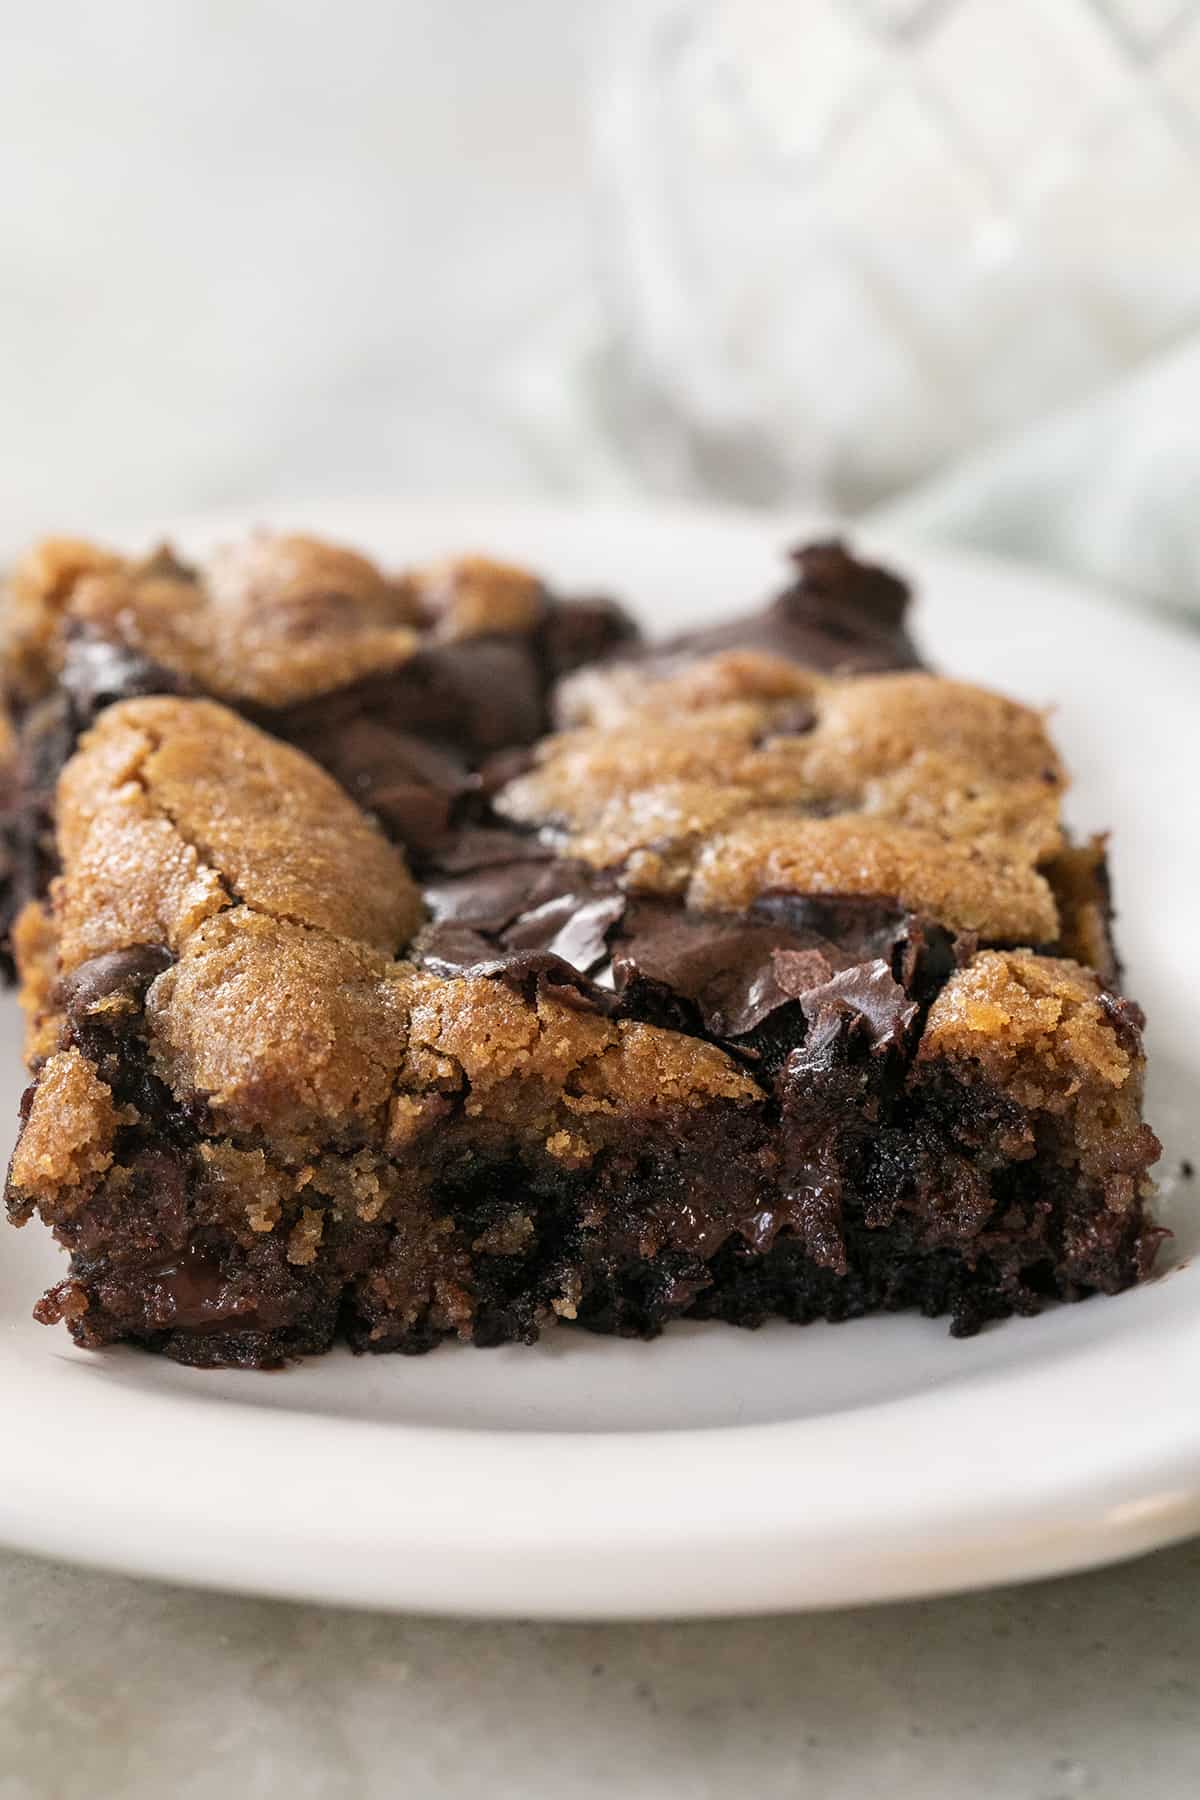 A brownie and a cookie baked together on a white plate.